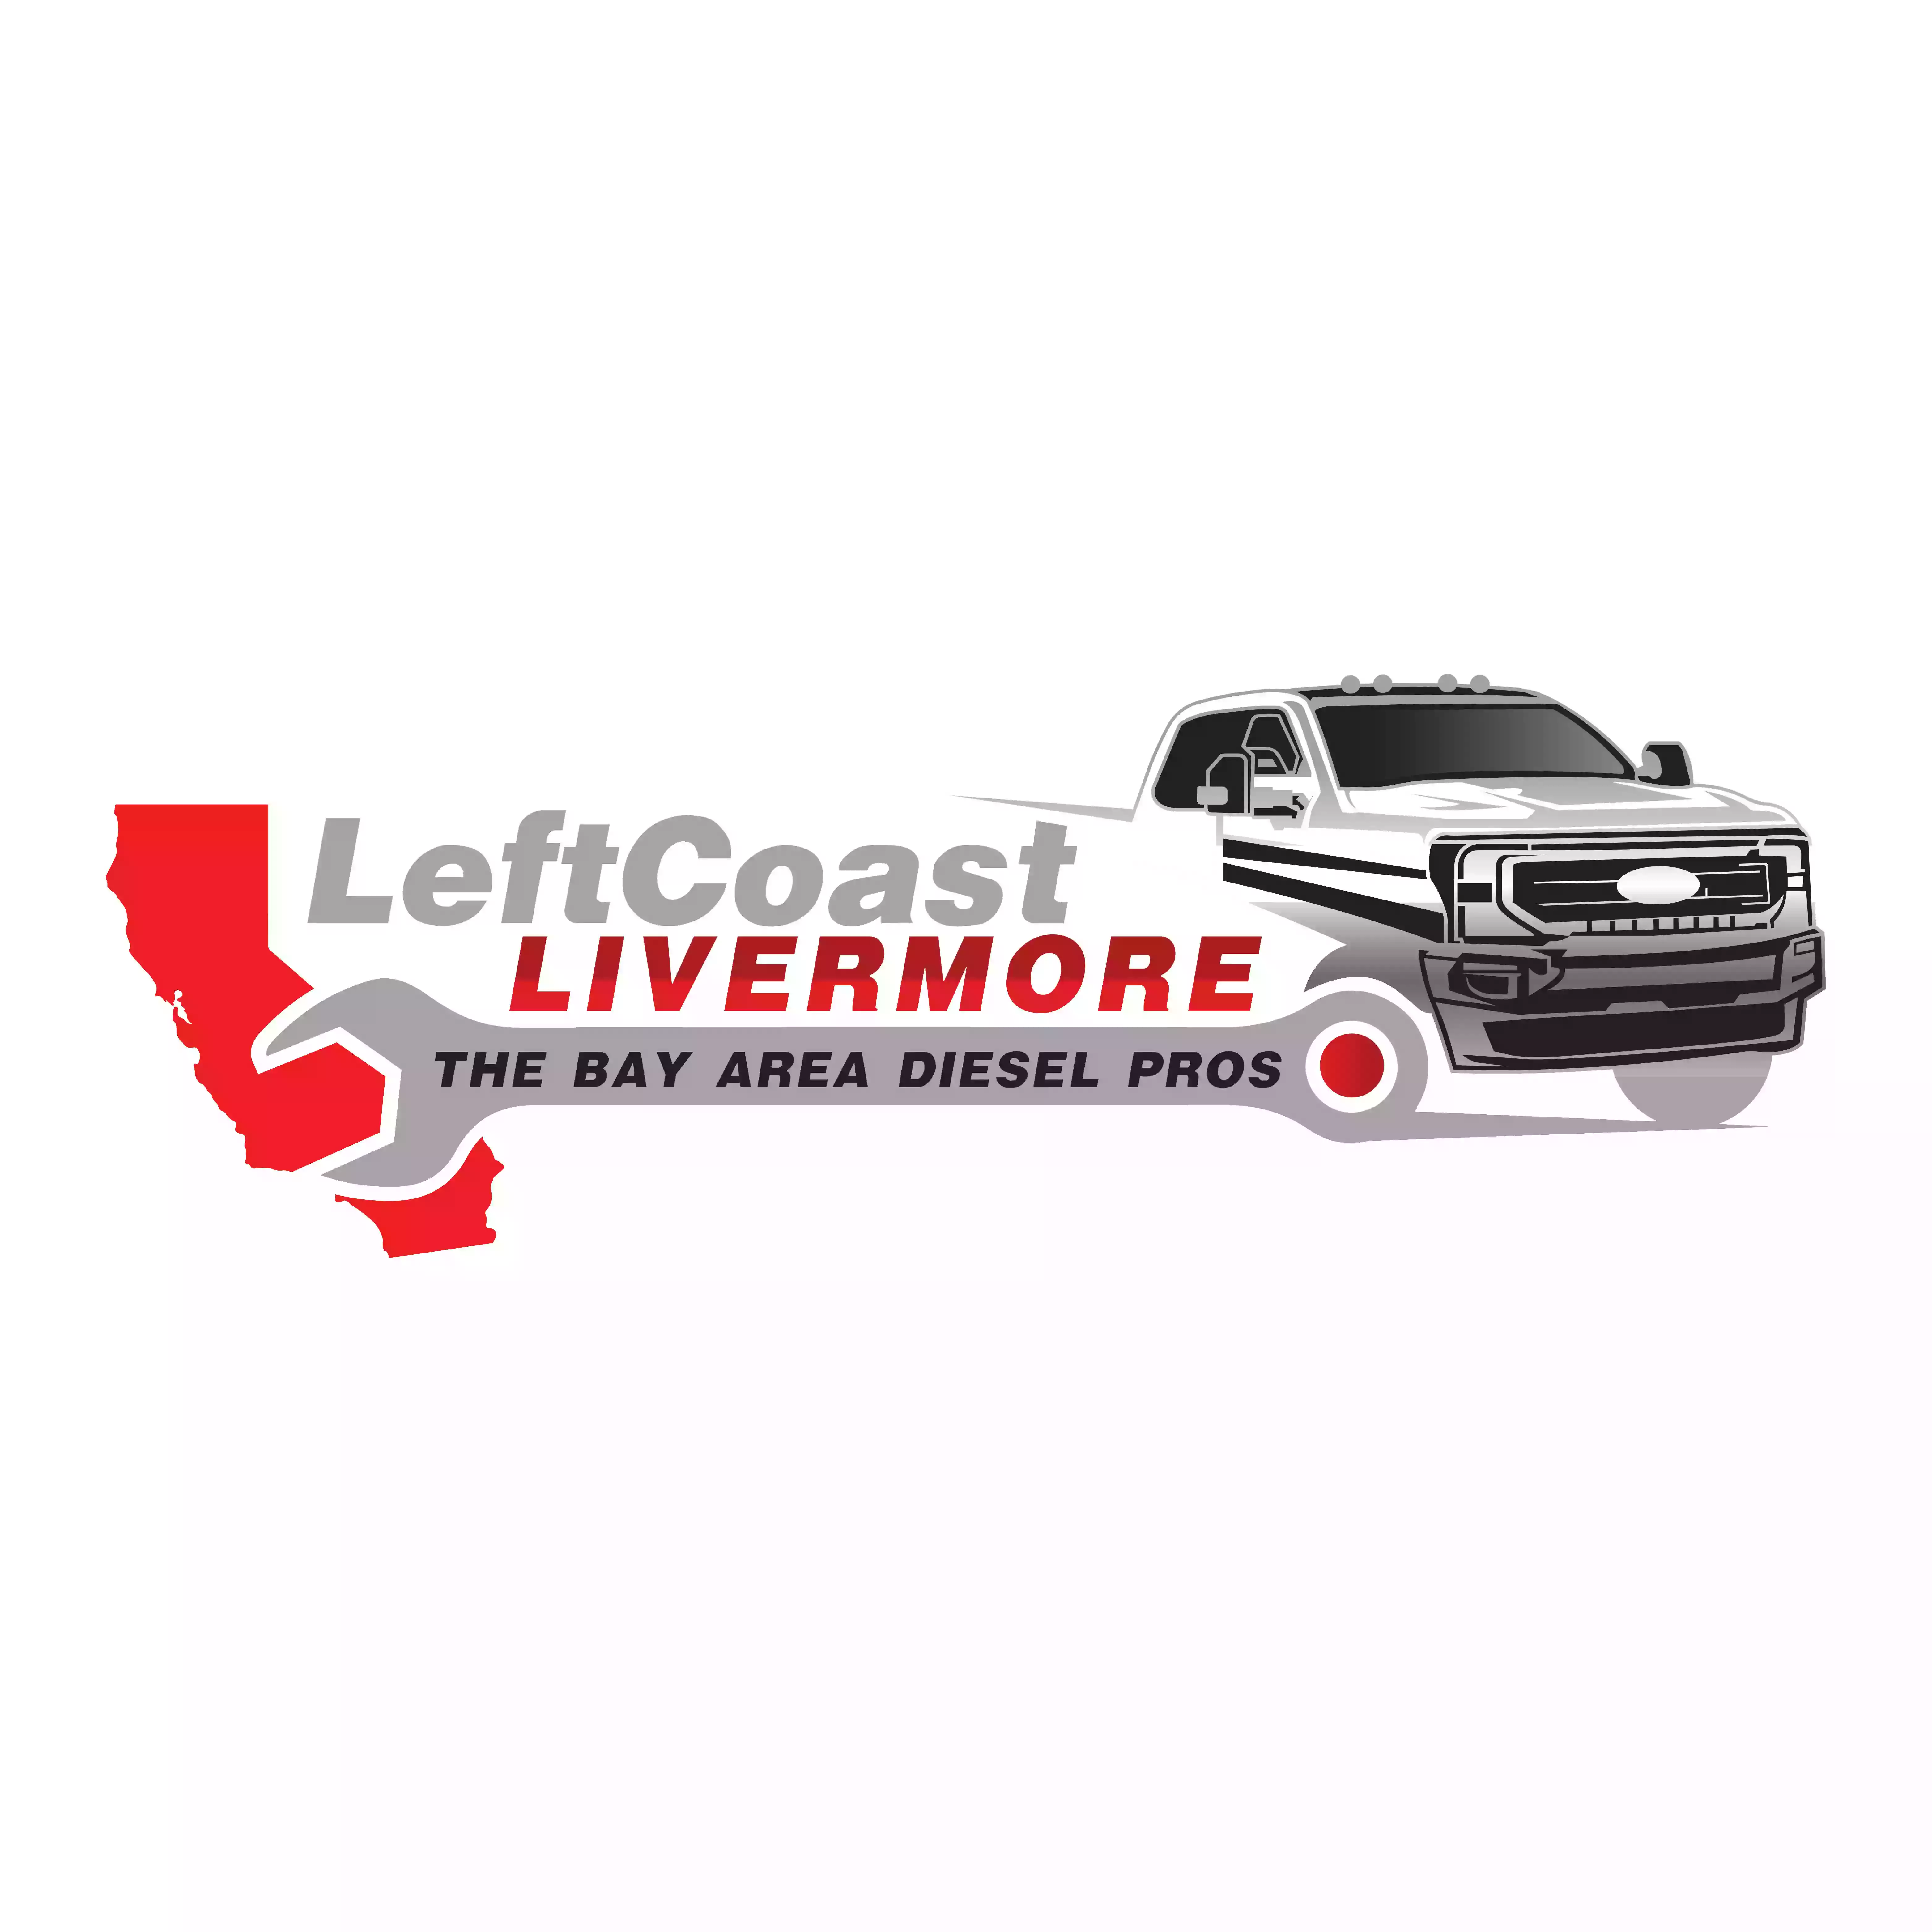 Left Coast Livermore “ The Bay Area Diesel Pros “